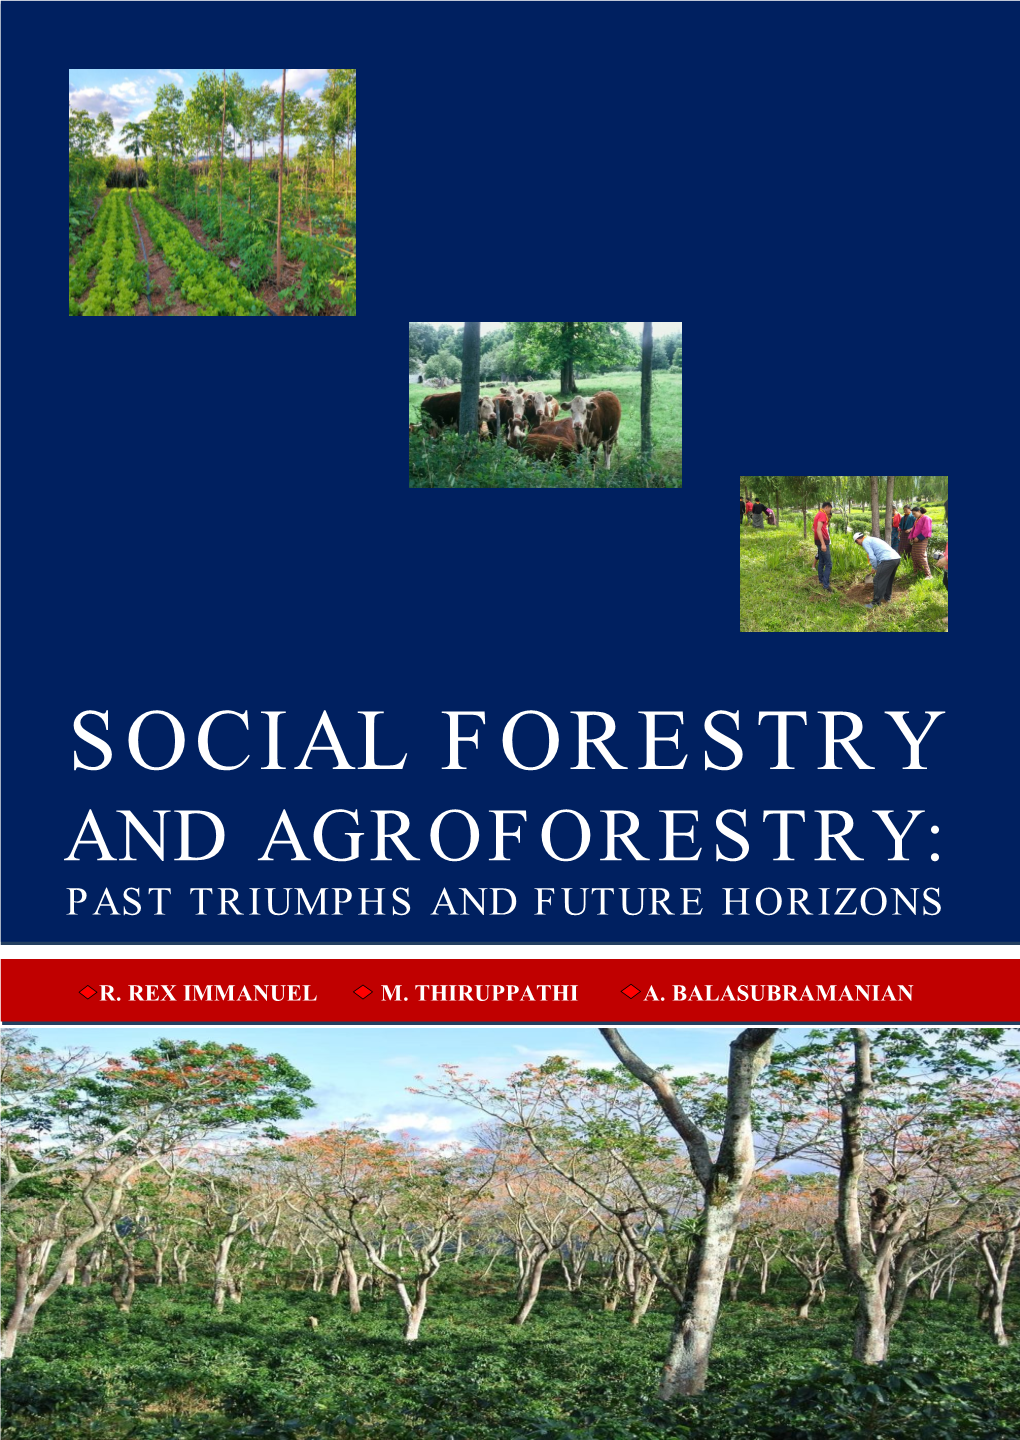 Social Forestry and Agroforestry: Past Triumphs and Future Horizons